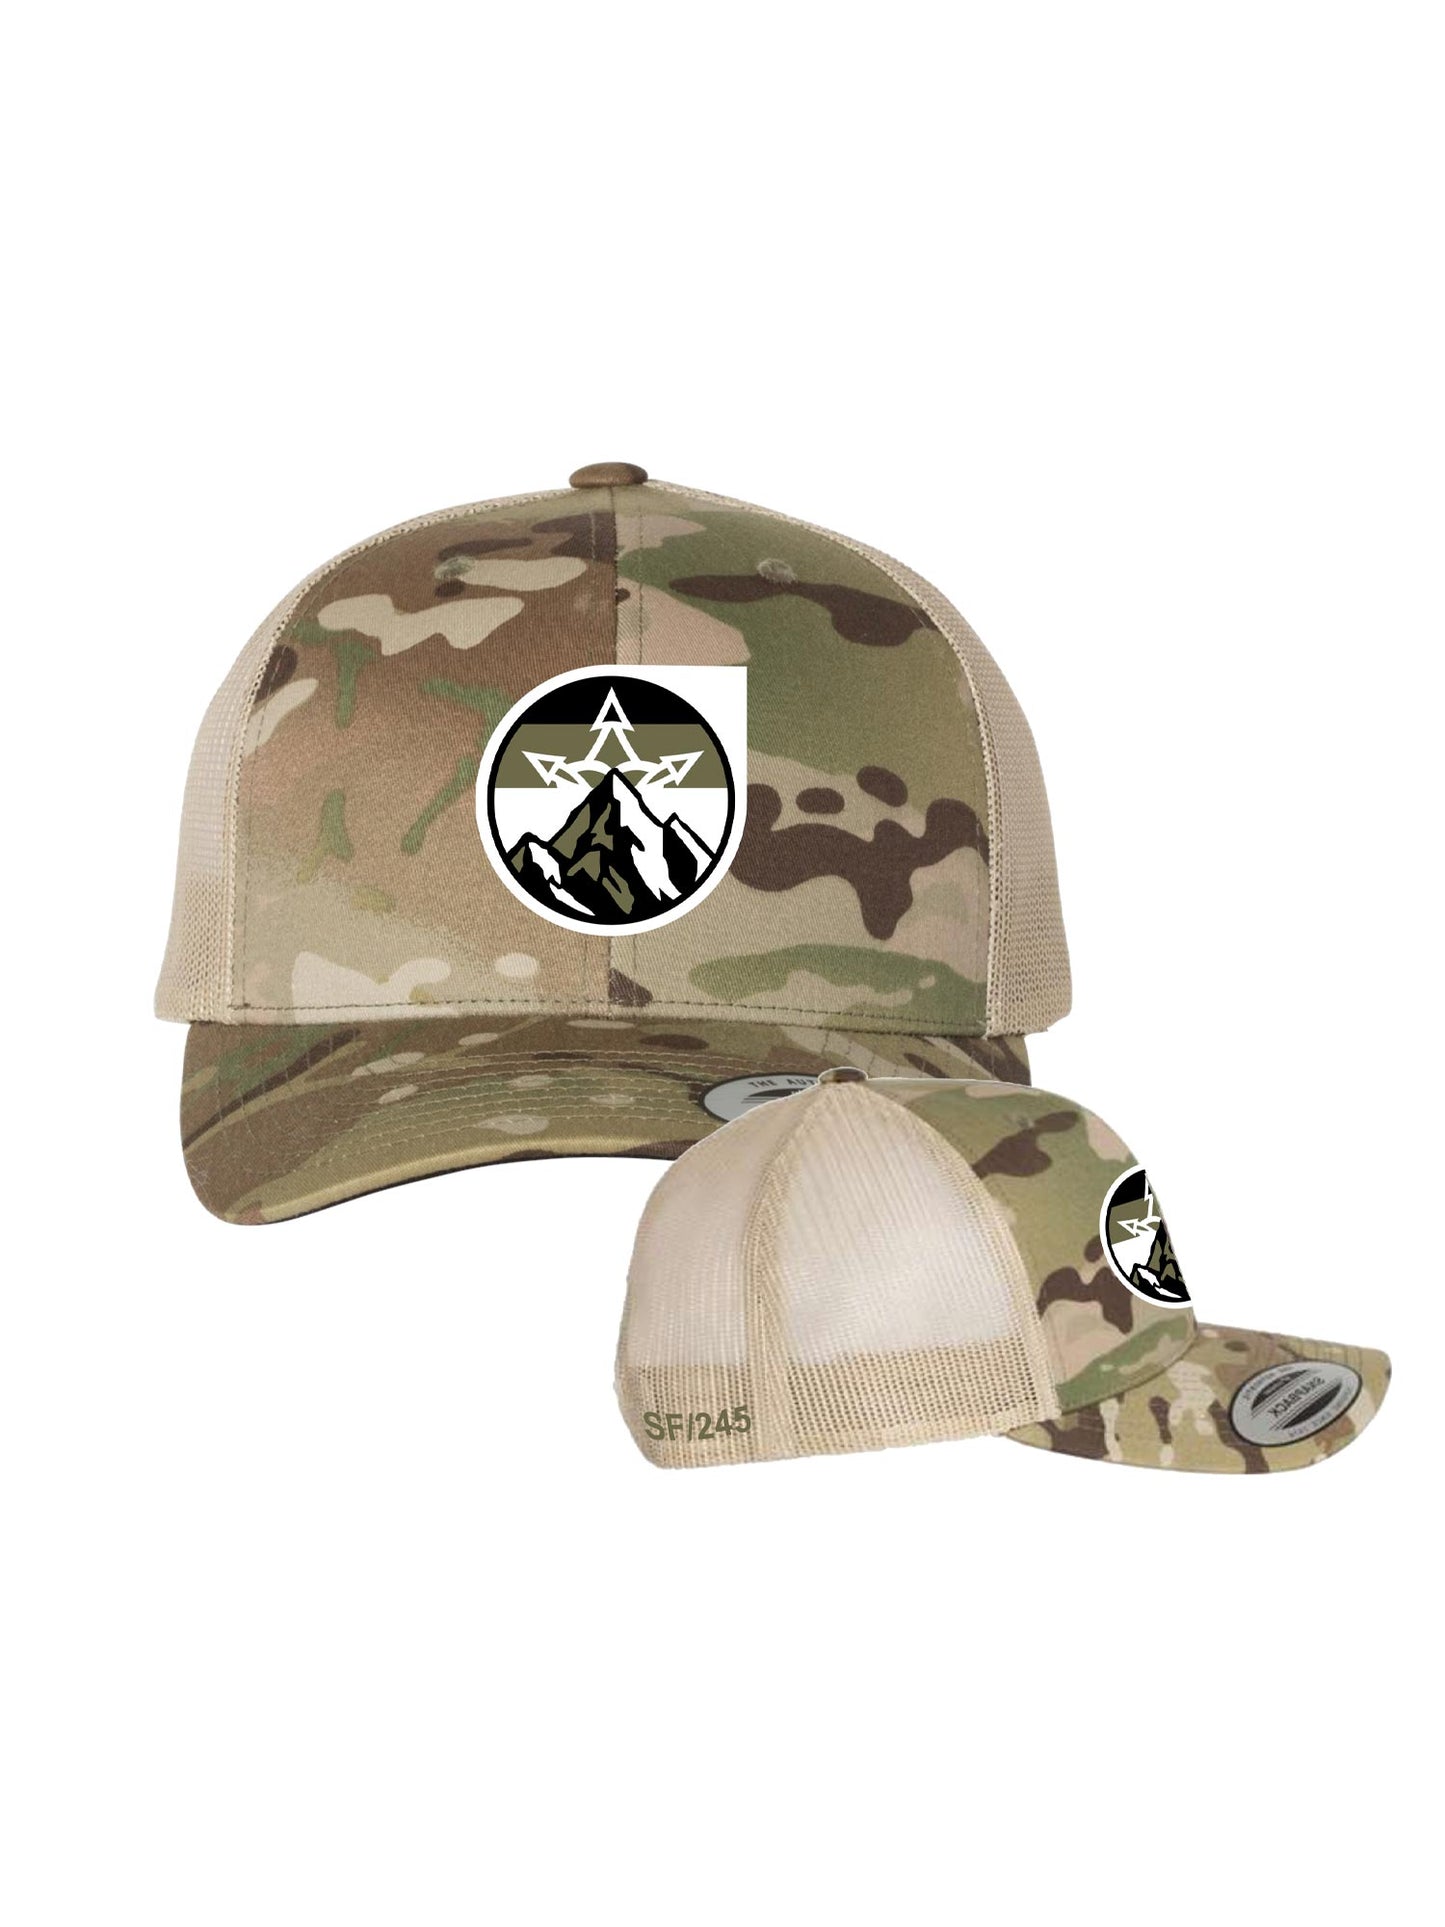 Snowflake Mountain trucker hat camo with tan back